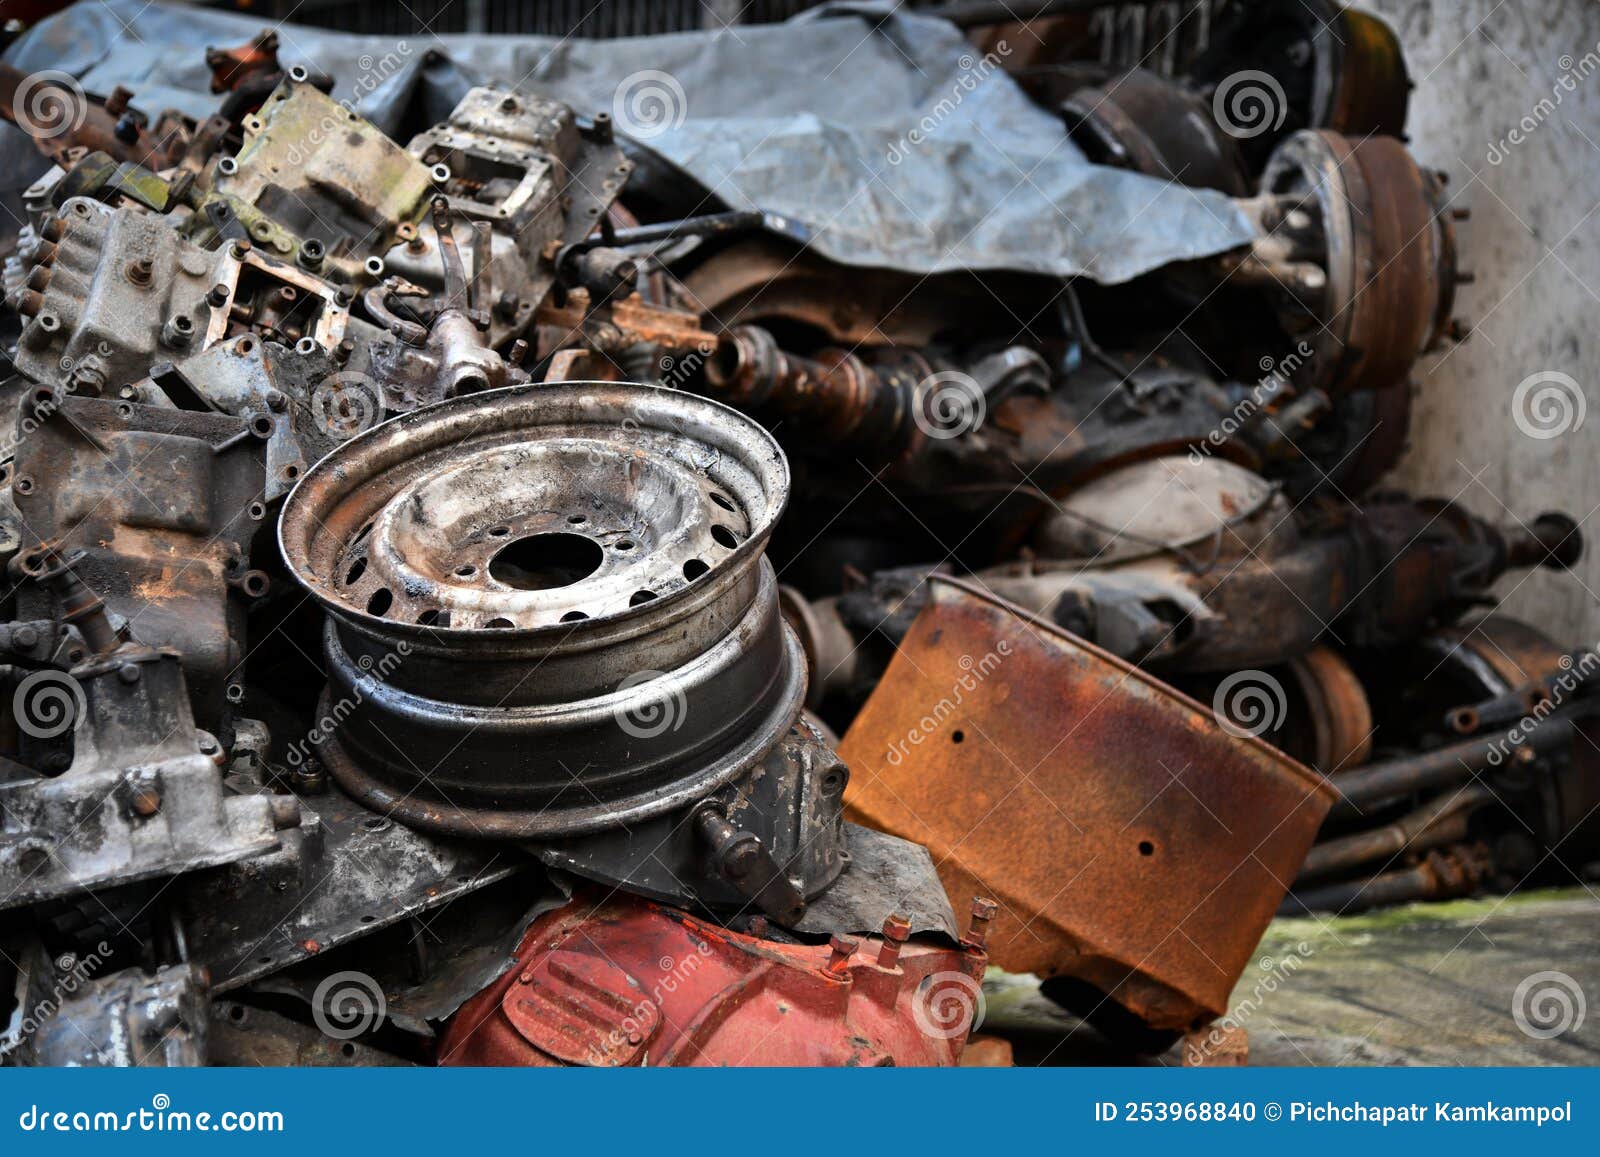 Pile Of Old Machine Parts And Car Spare Parts Rusty And Corroded